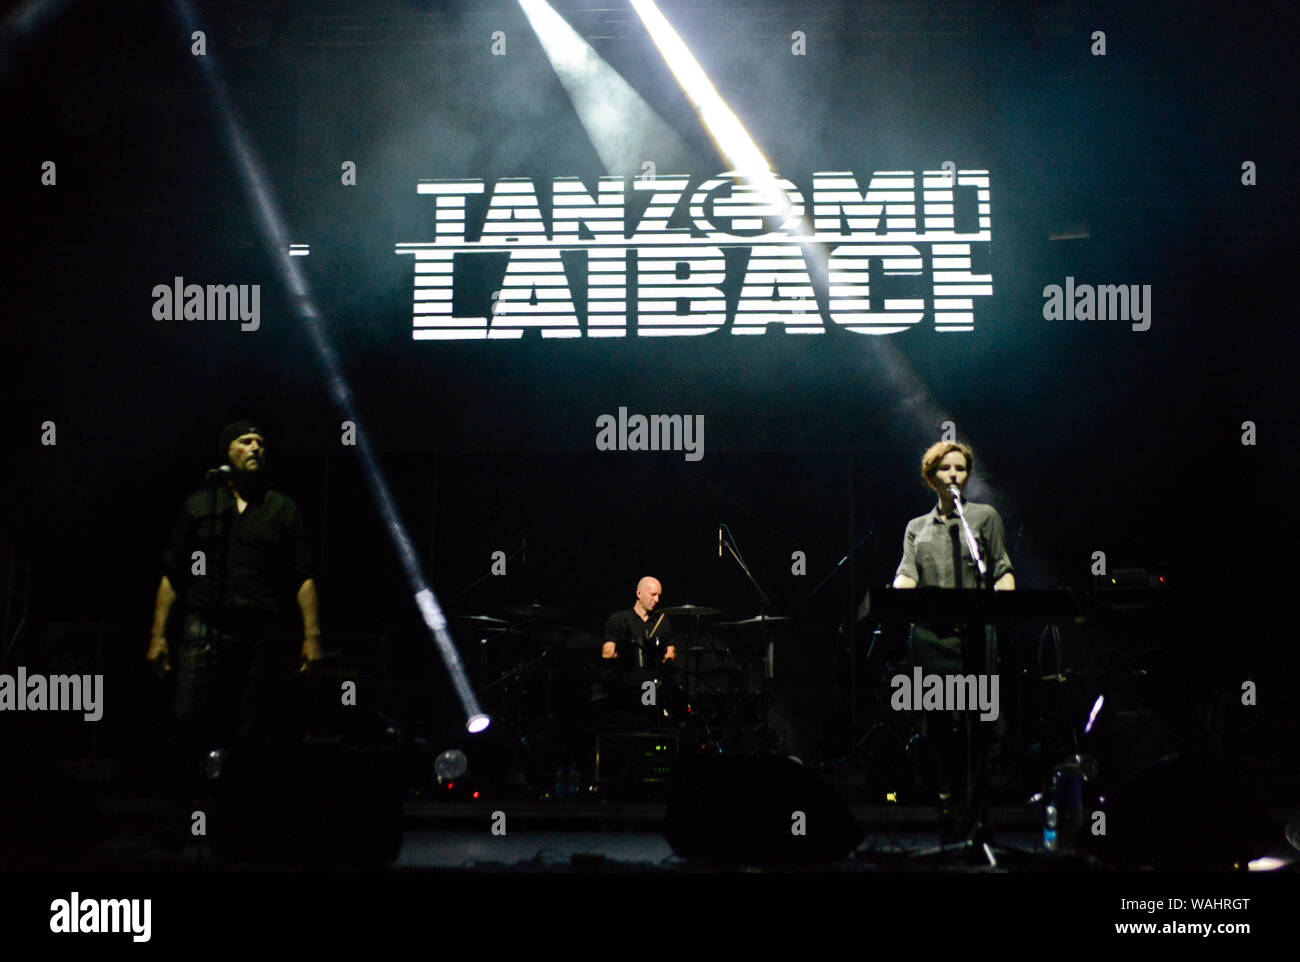 Laibach, Slovenian industrial band Stock Photo